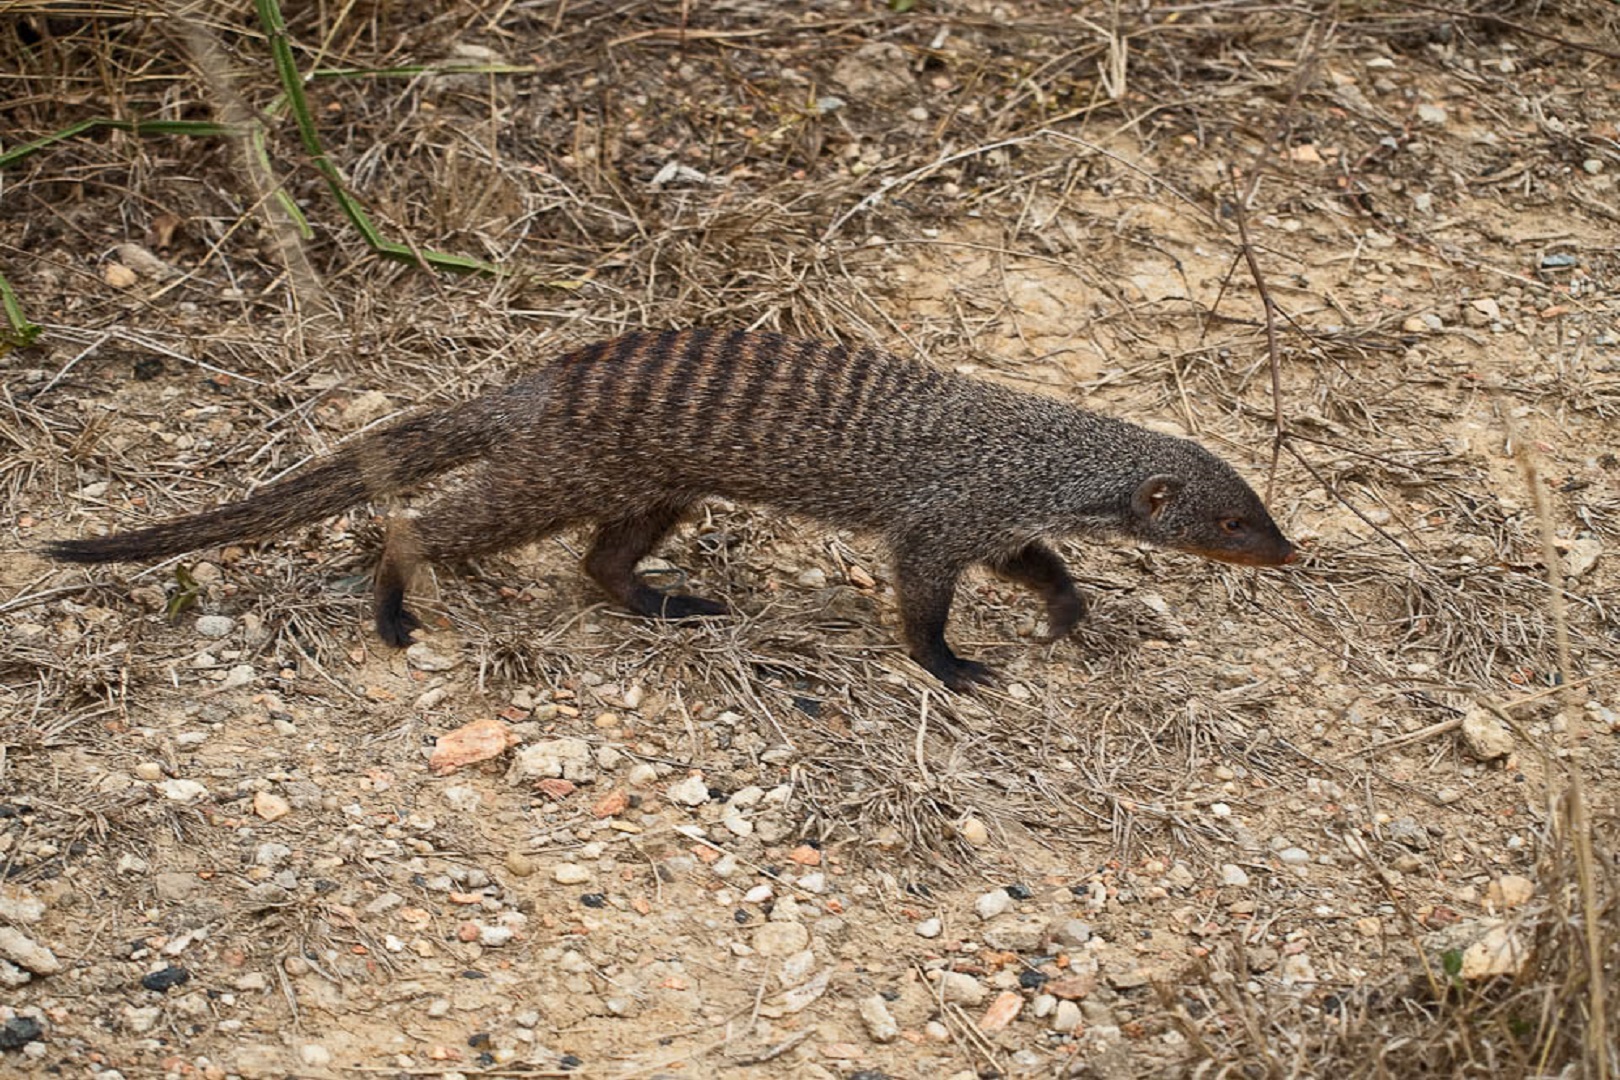 An adult mongoose spotted in Queen Elizabeth National Park